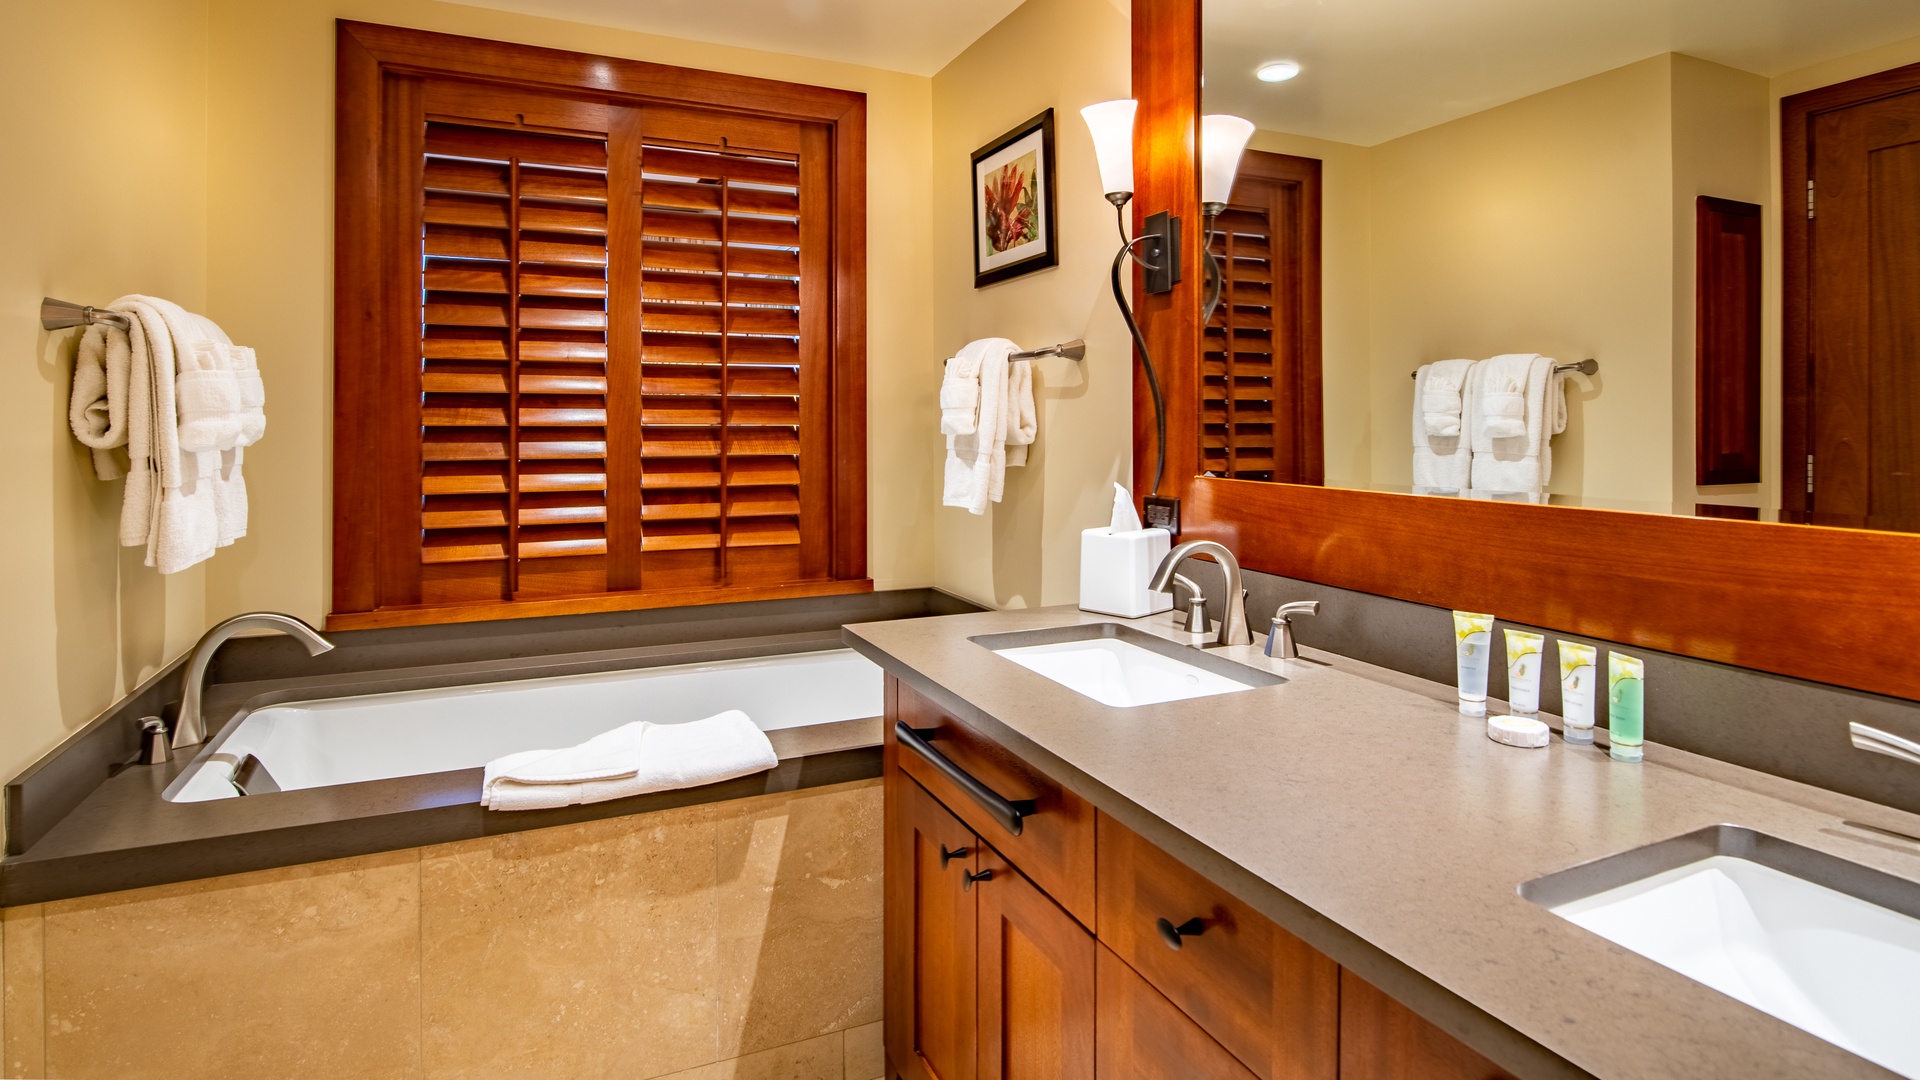 Kapolei Vacation Rentals, Ko Olina Beach Villas B505 - The primary guest bathroom with a luxurious soaking tub.